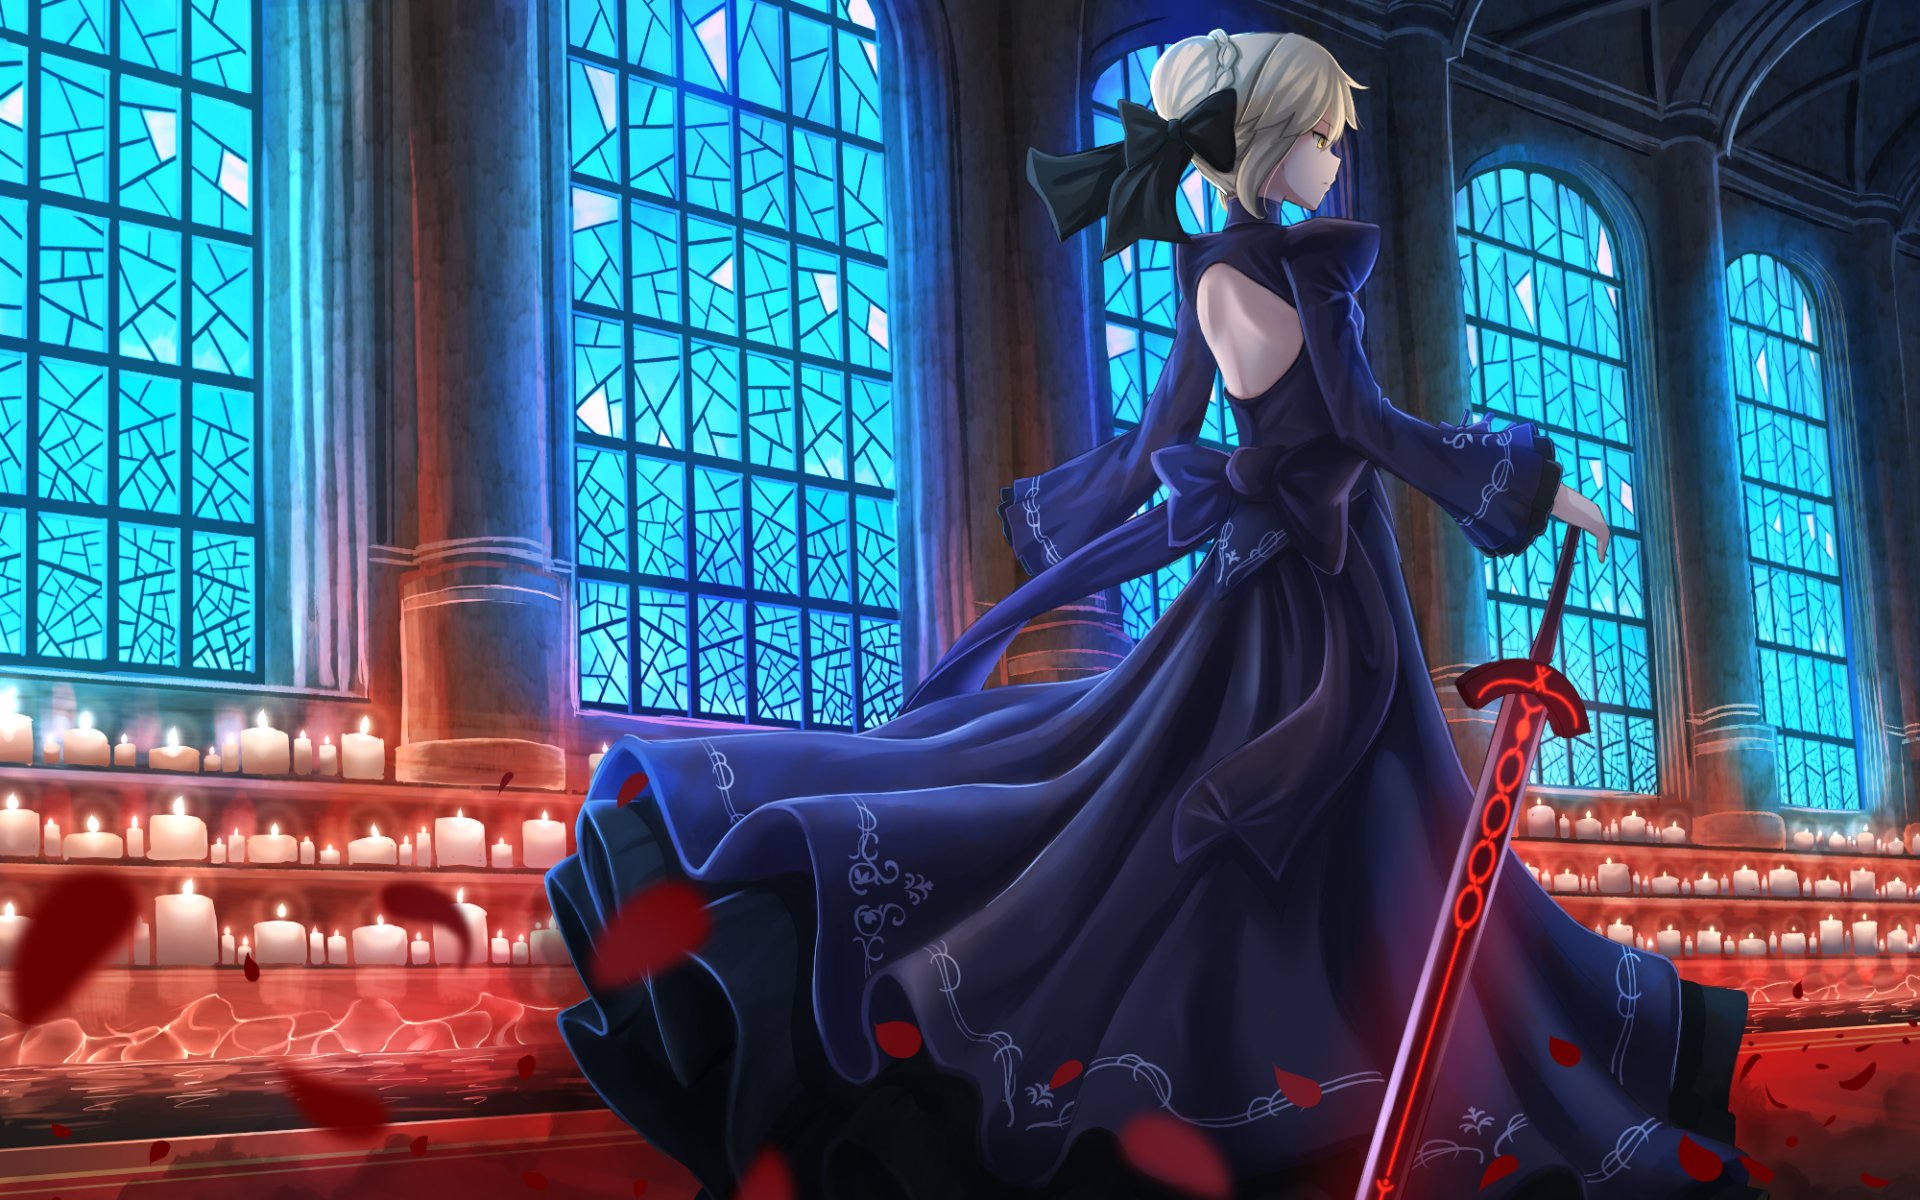 Download wallpapers Saber Alter, night, Fate Grand Order, sword, manga,  TYPE-MOON, Fate Series for desktop with resolution 1920x1200. High Quality  HD pictures wallpapers